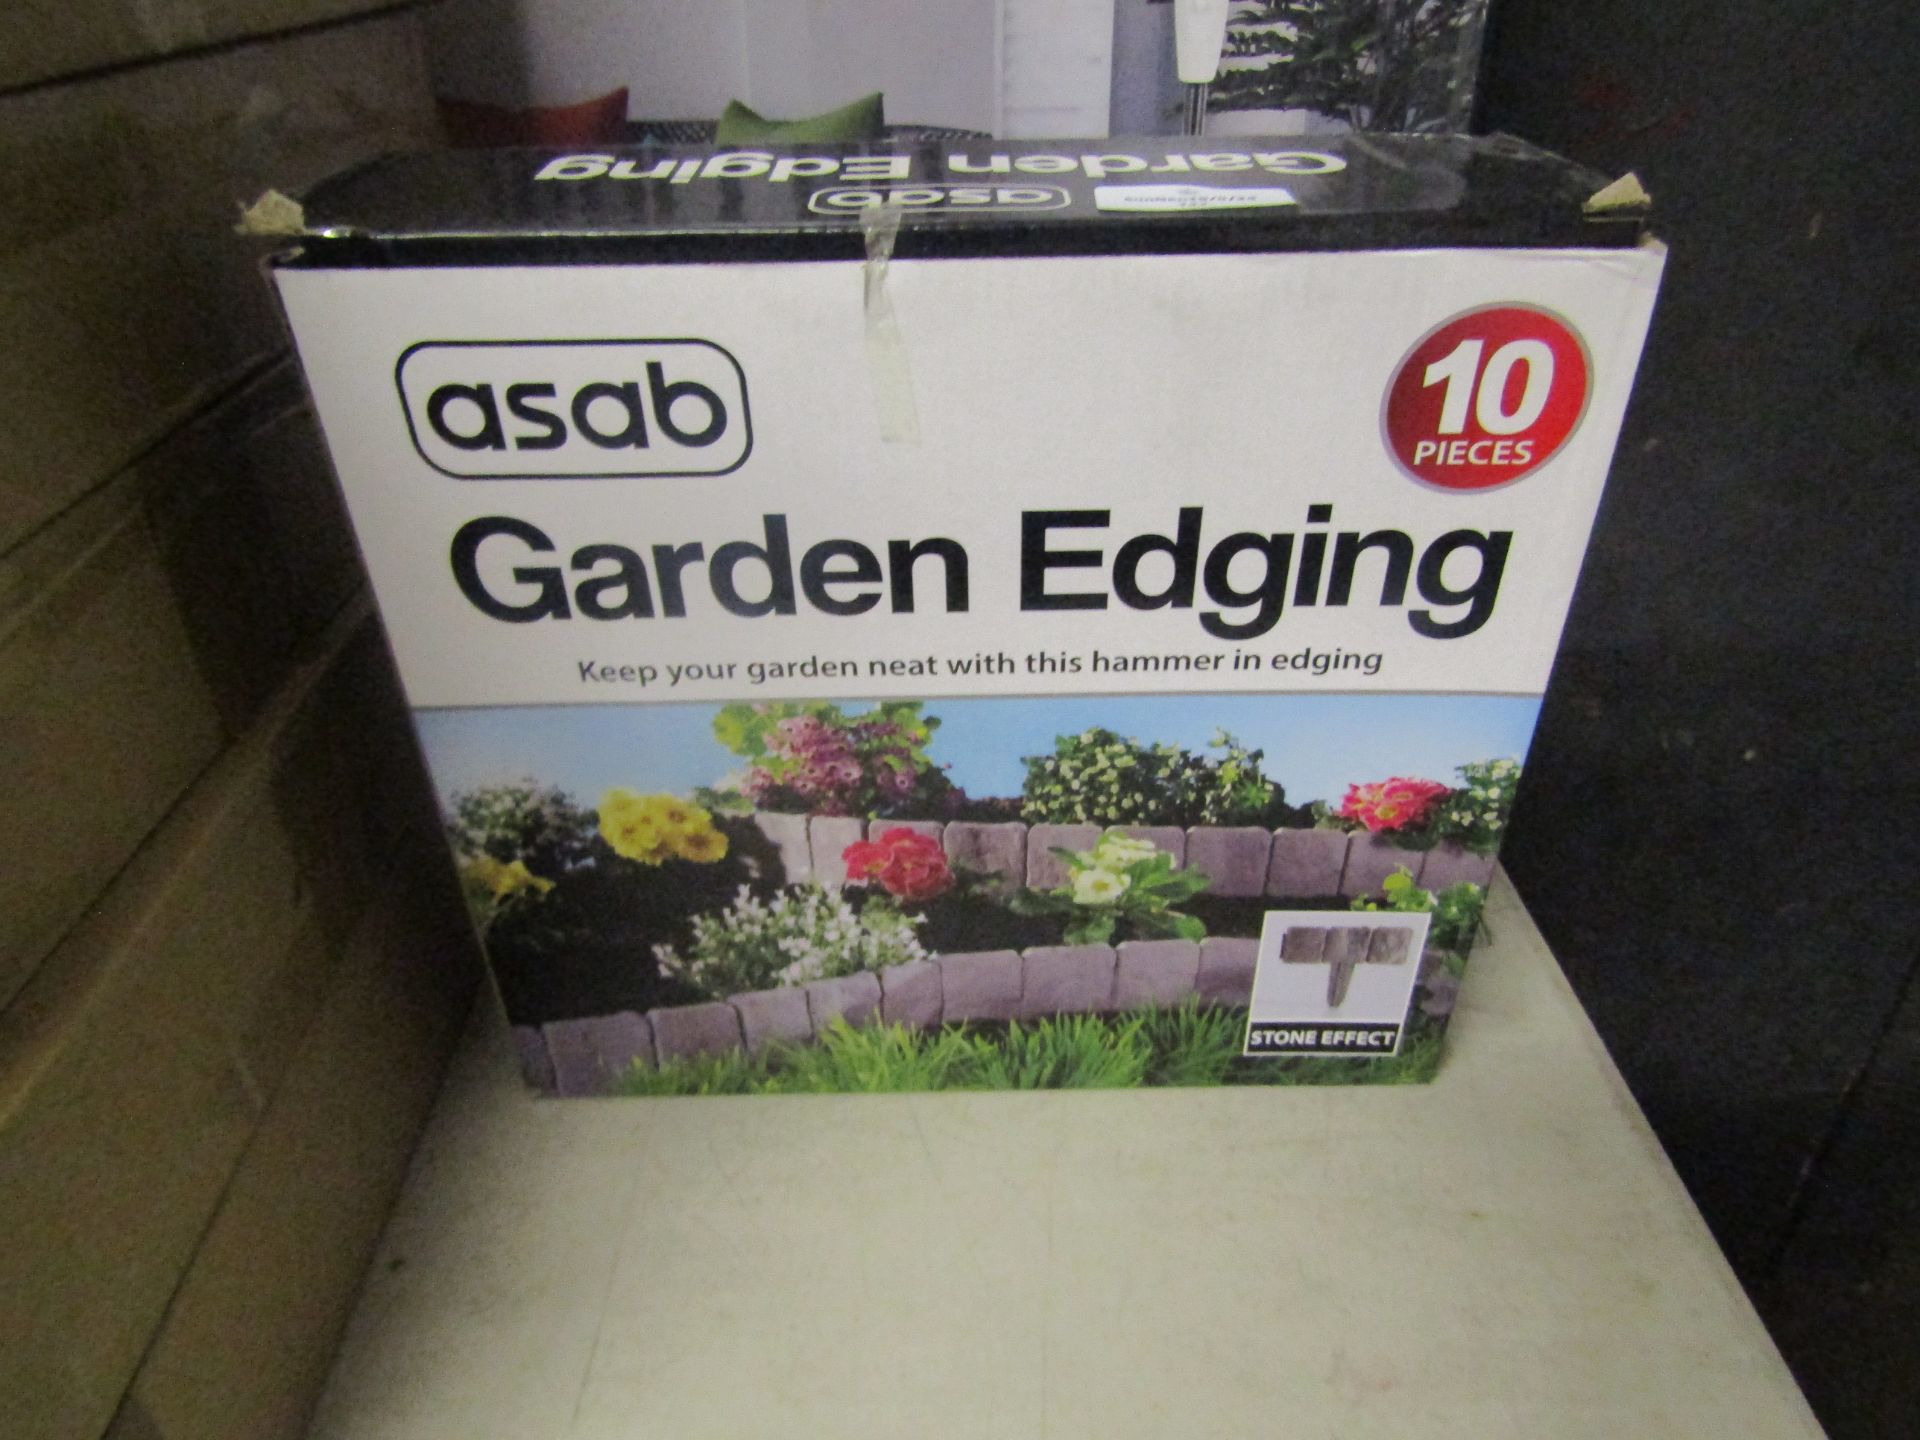 Asab 10pcs Garden Edging, Stone Effect - Unchecked & Boxed.